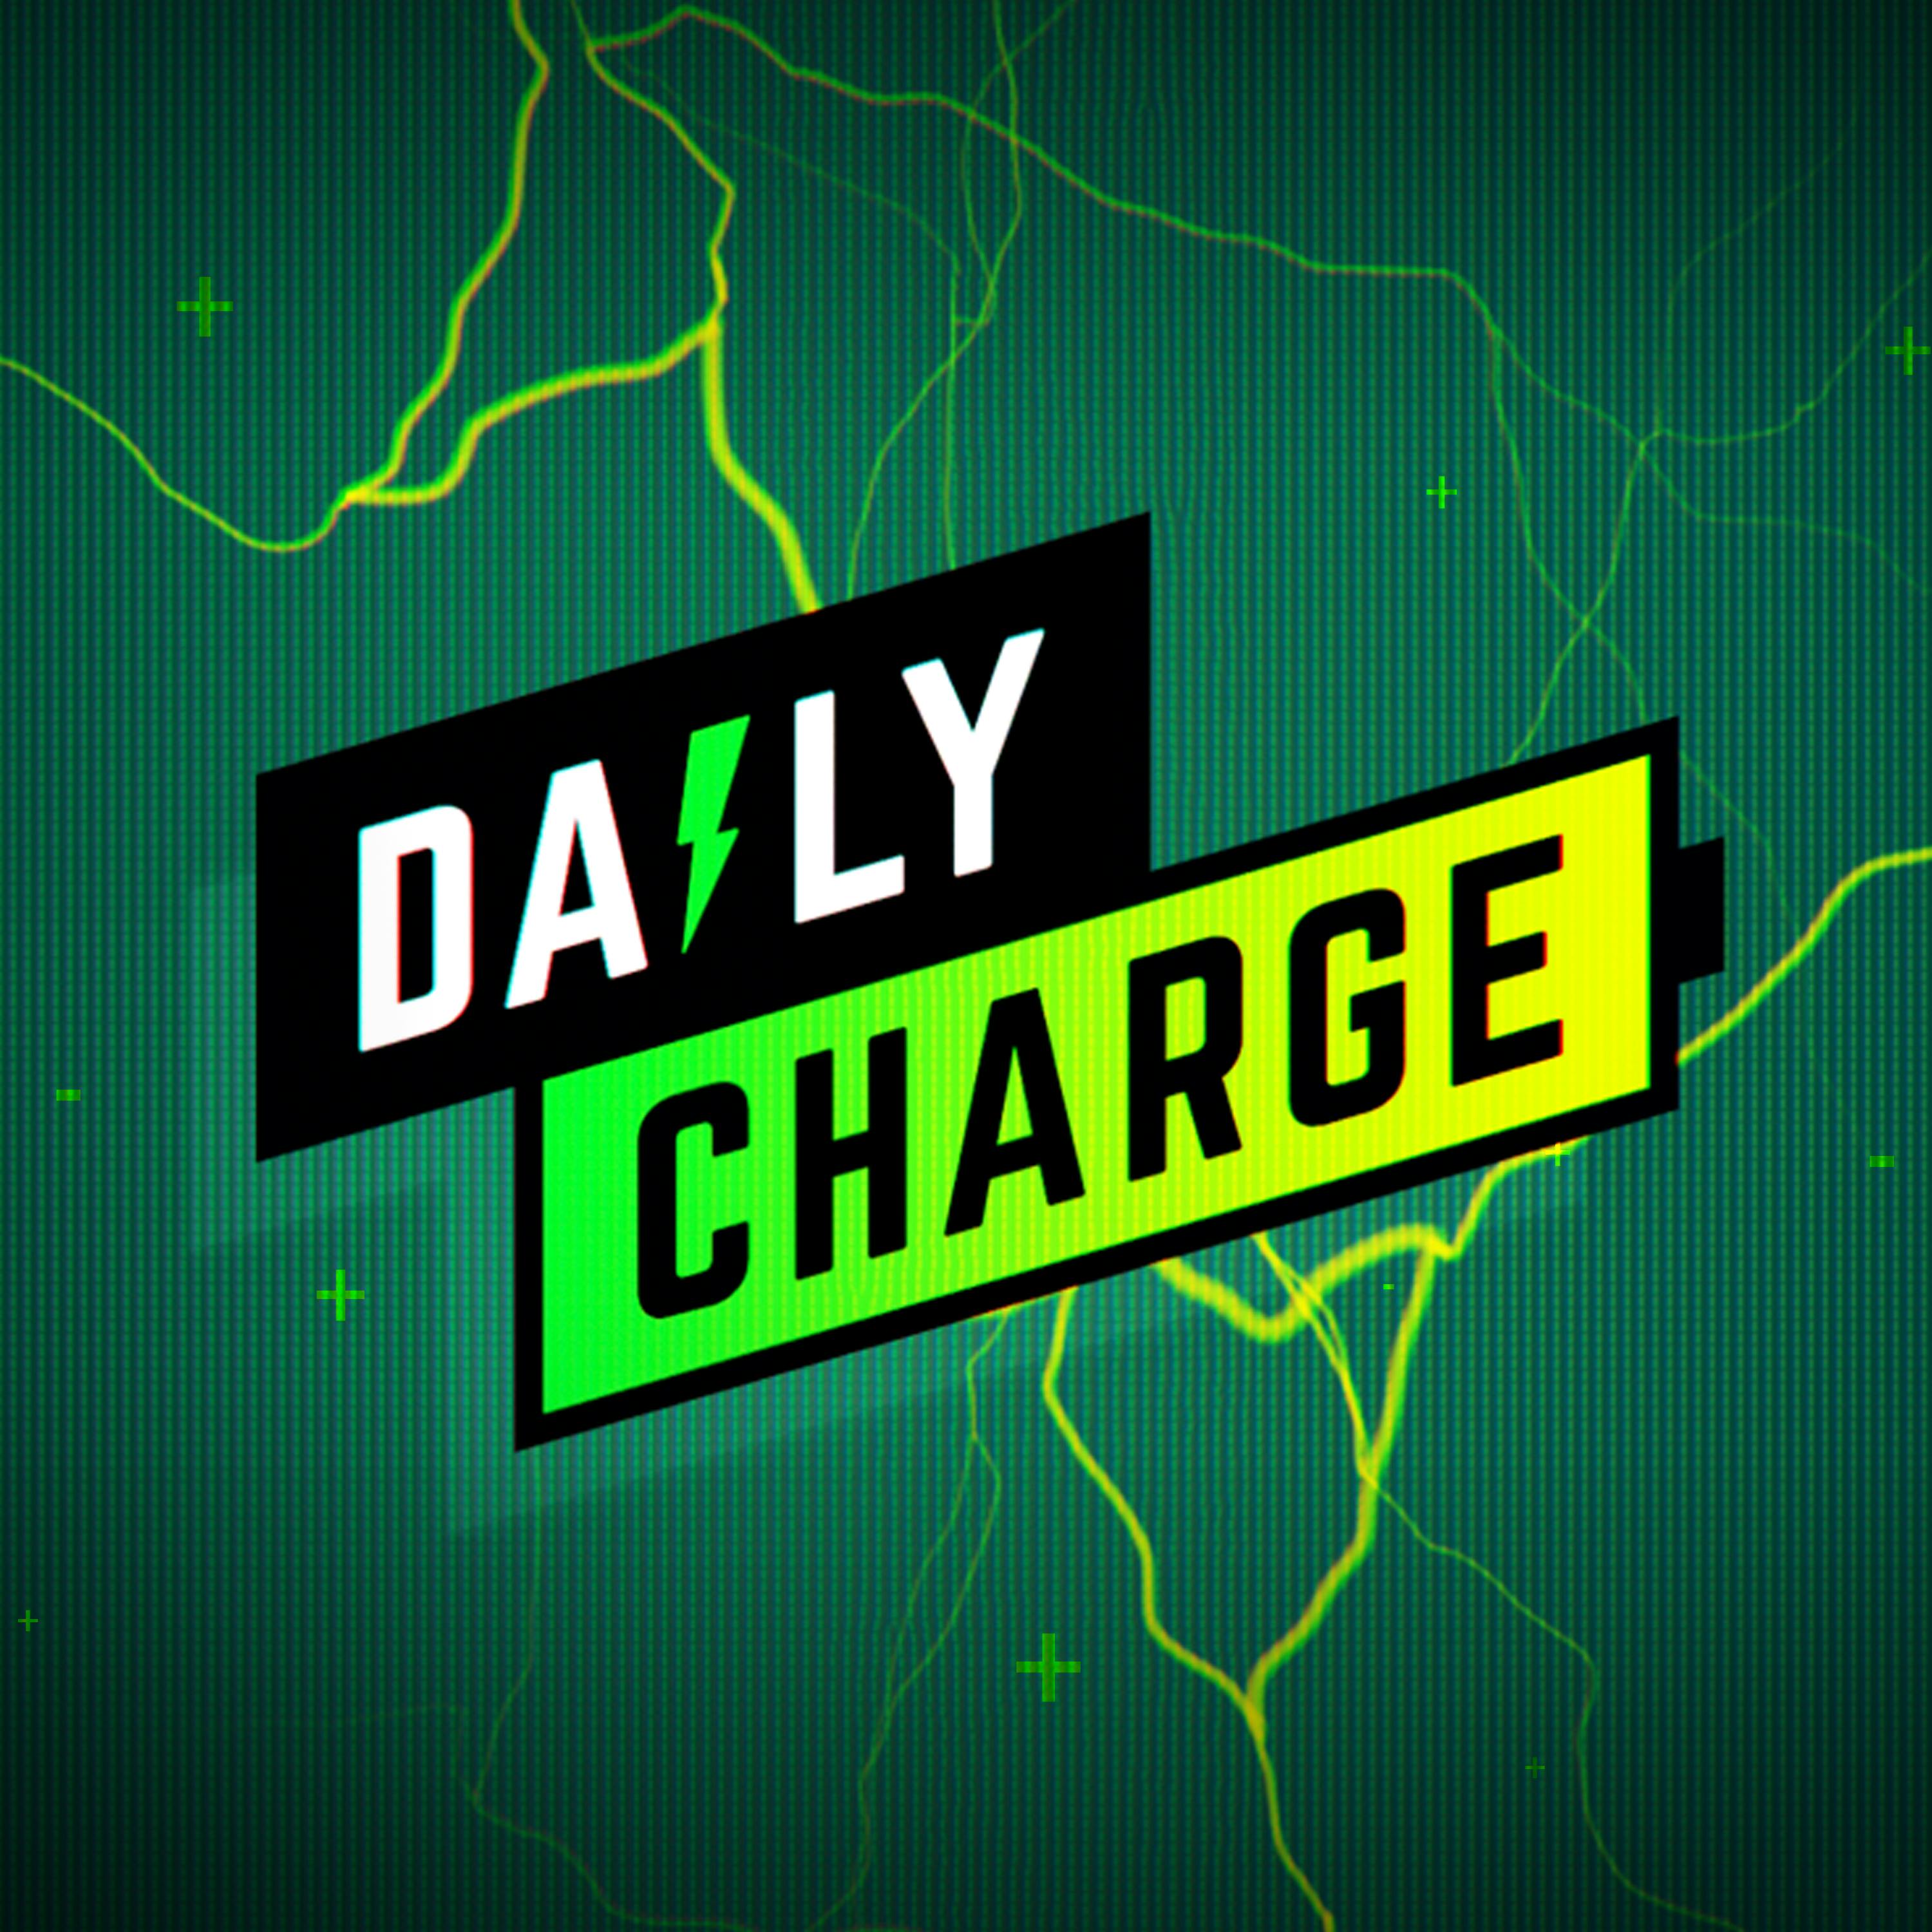 Why a new iPhone SE could be a big deal (The Daily Charge, 3/7/2022)